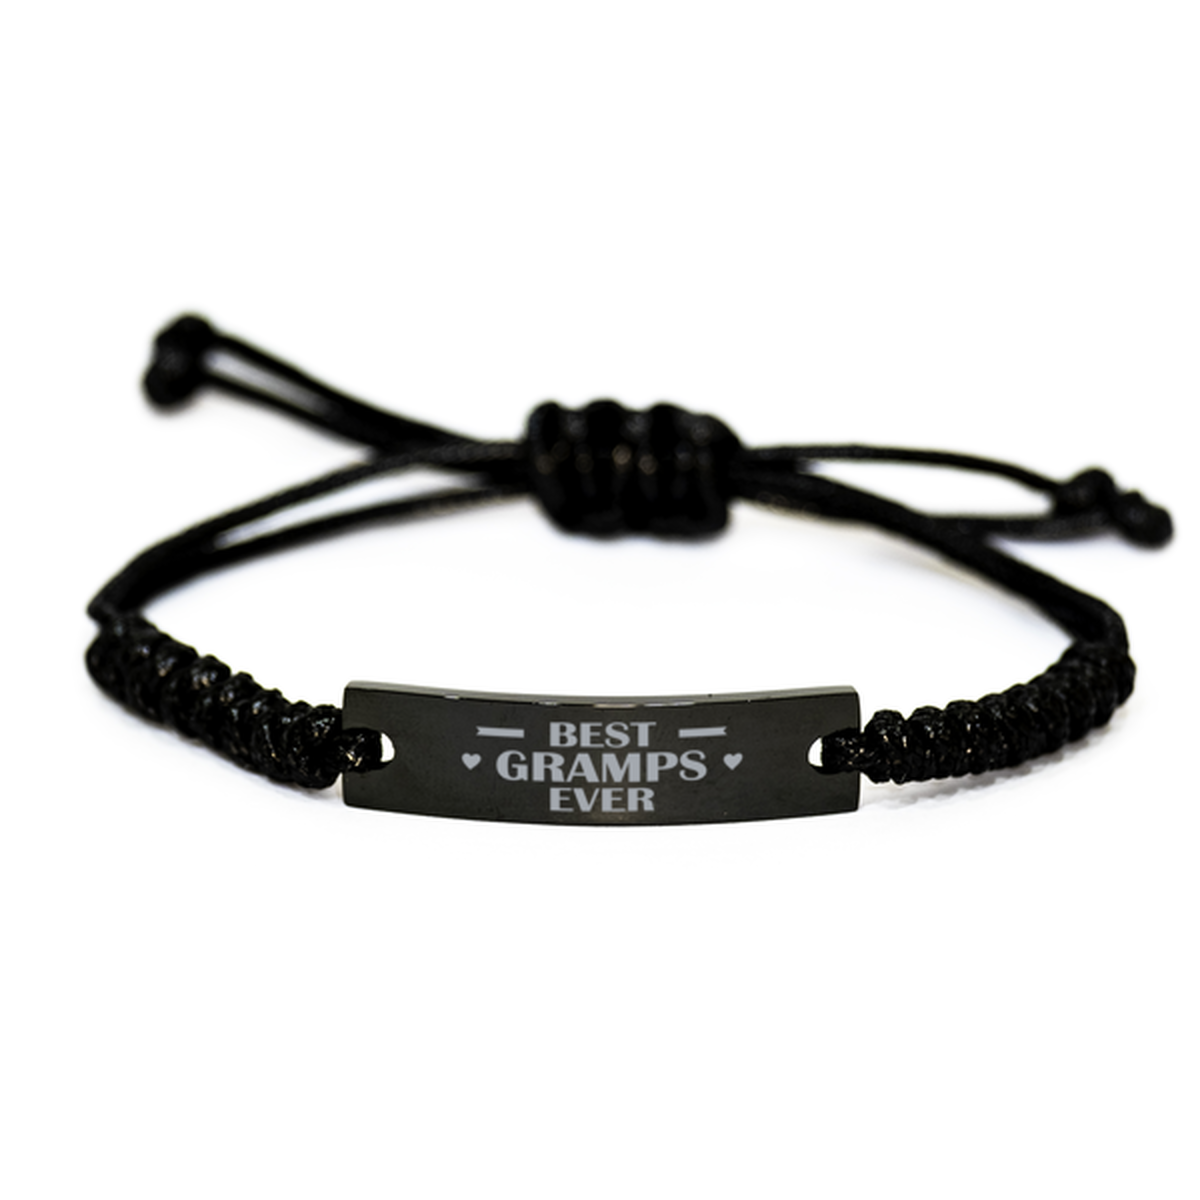 Best Gramps Ever Gramps Gifts, Funny Engraved Rope Bracelet For Gramps, Birthday Family Gifts For Women